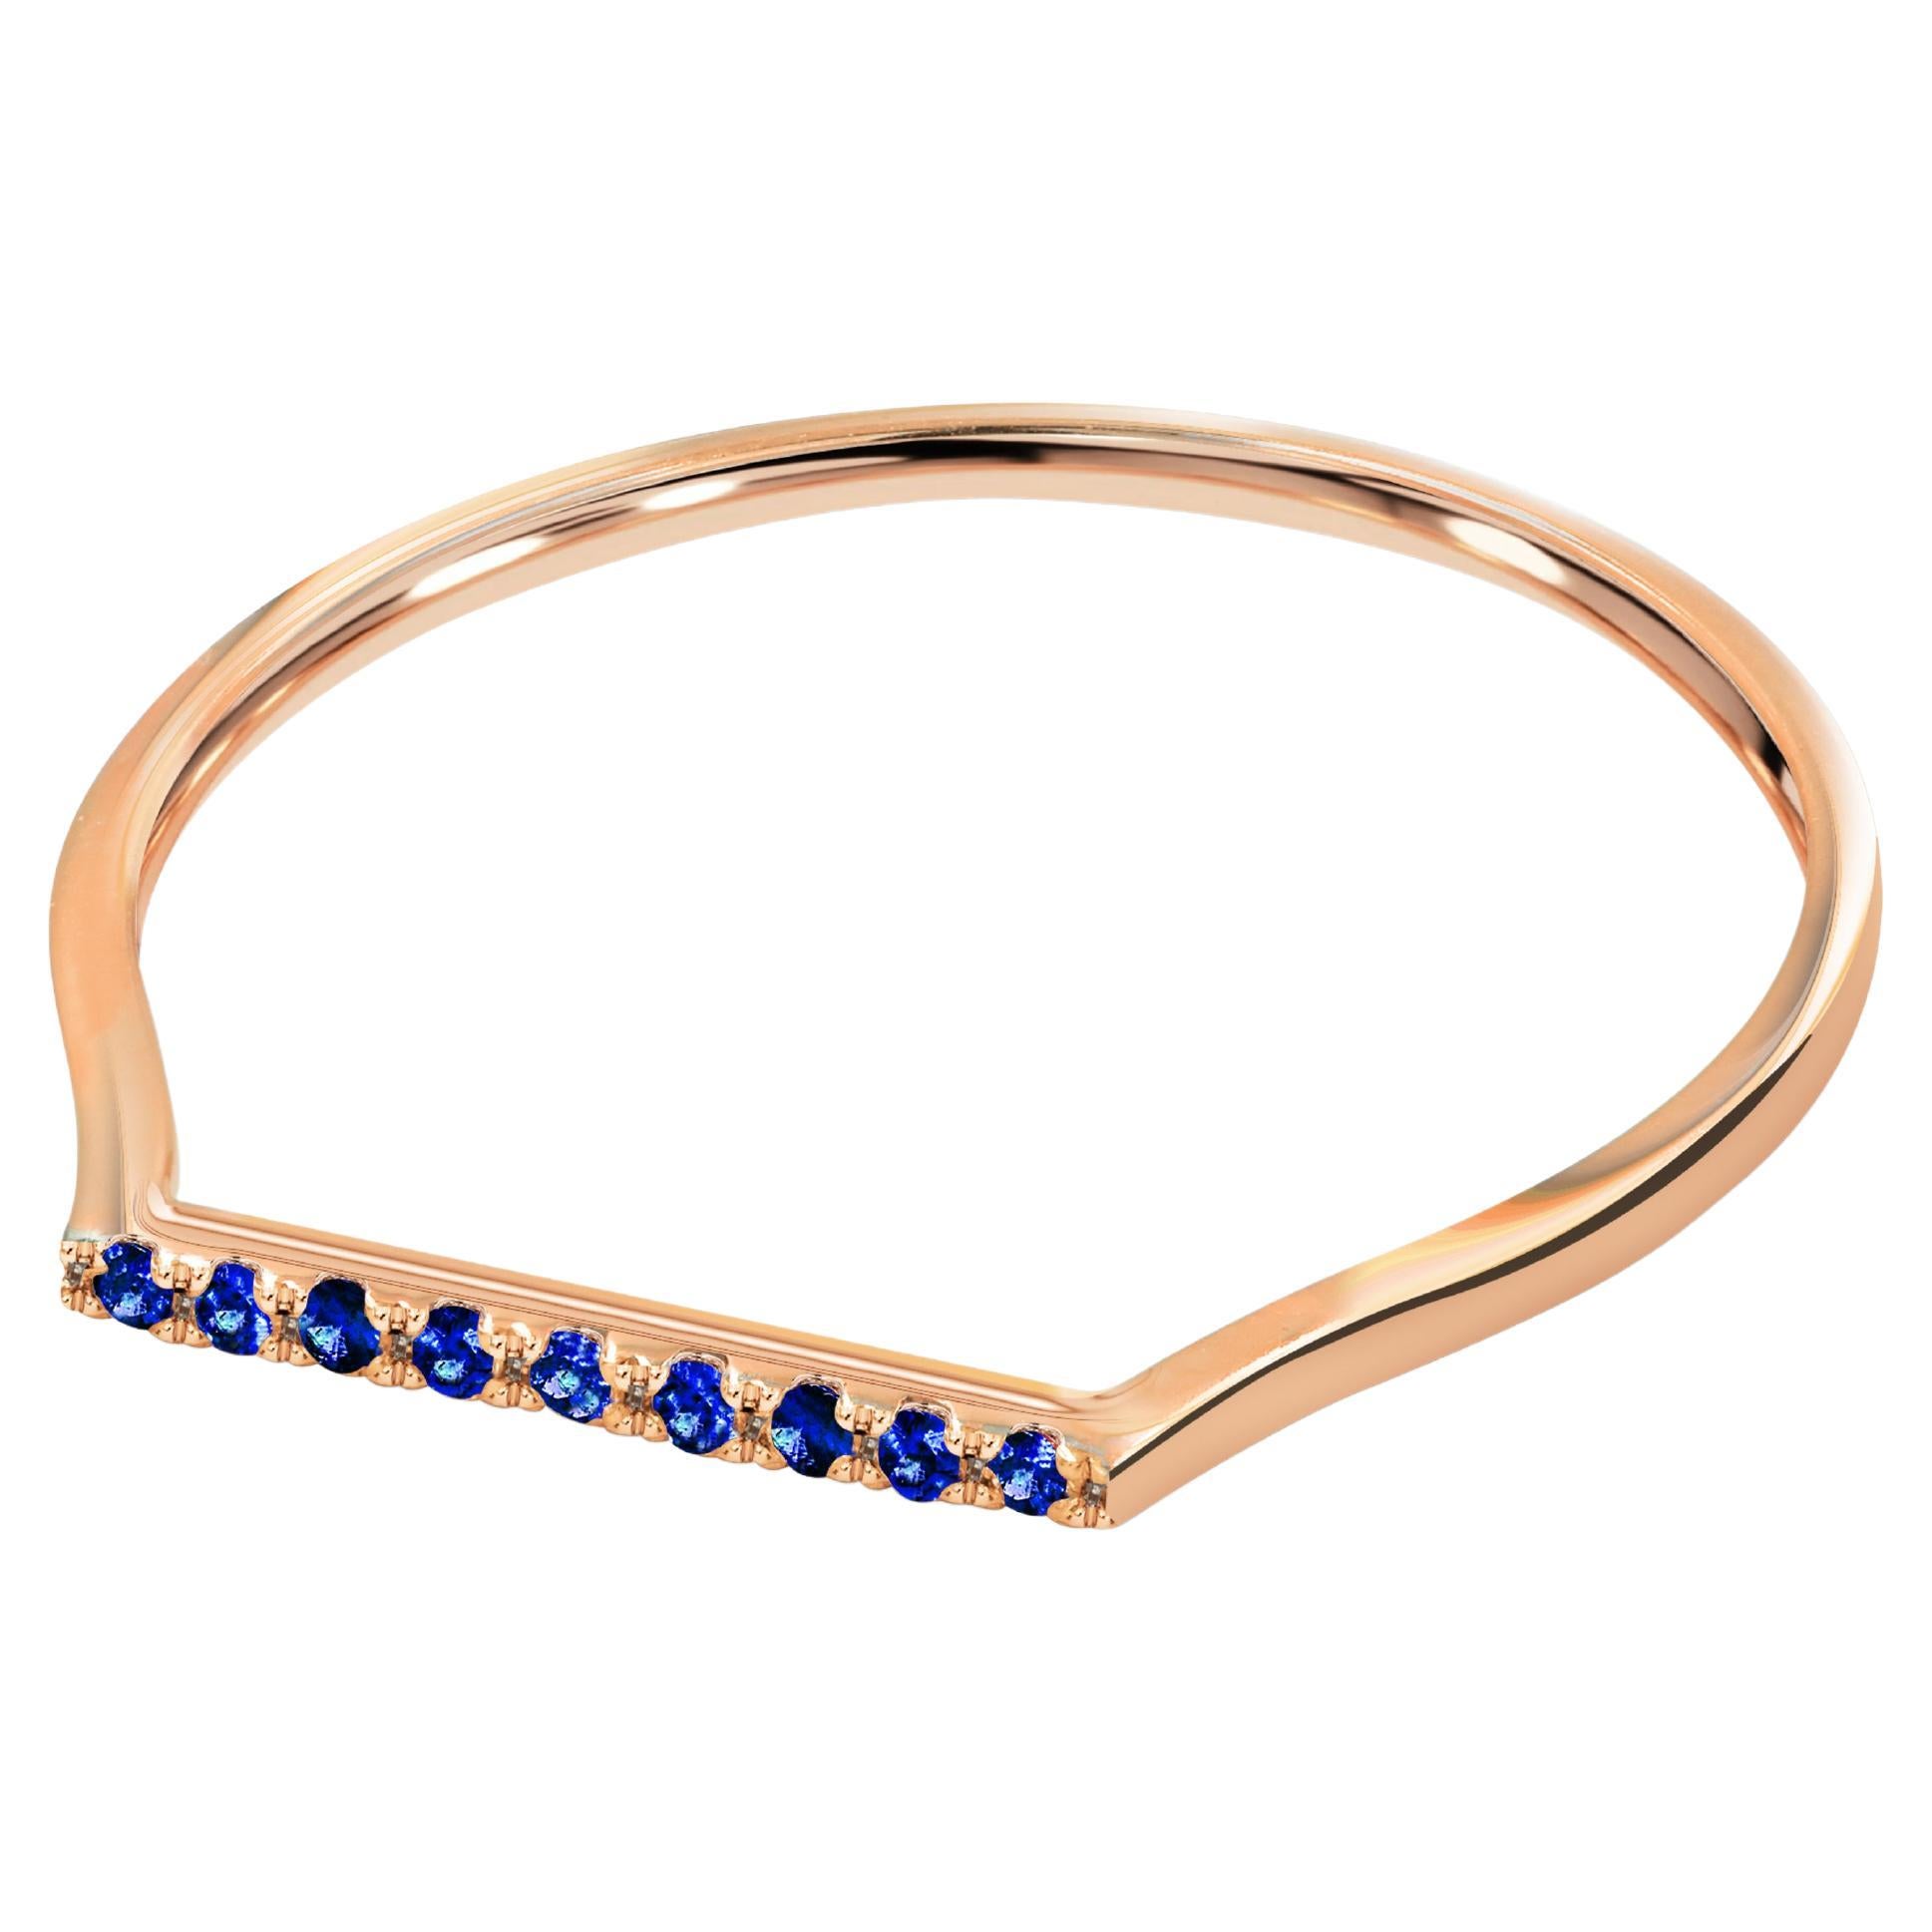 For Sale:  18k Gold Natural Sapphire Ring Thin Stacking Gold Ring